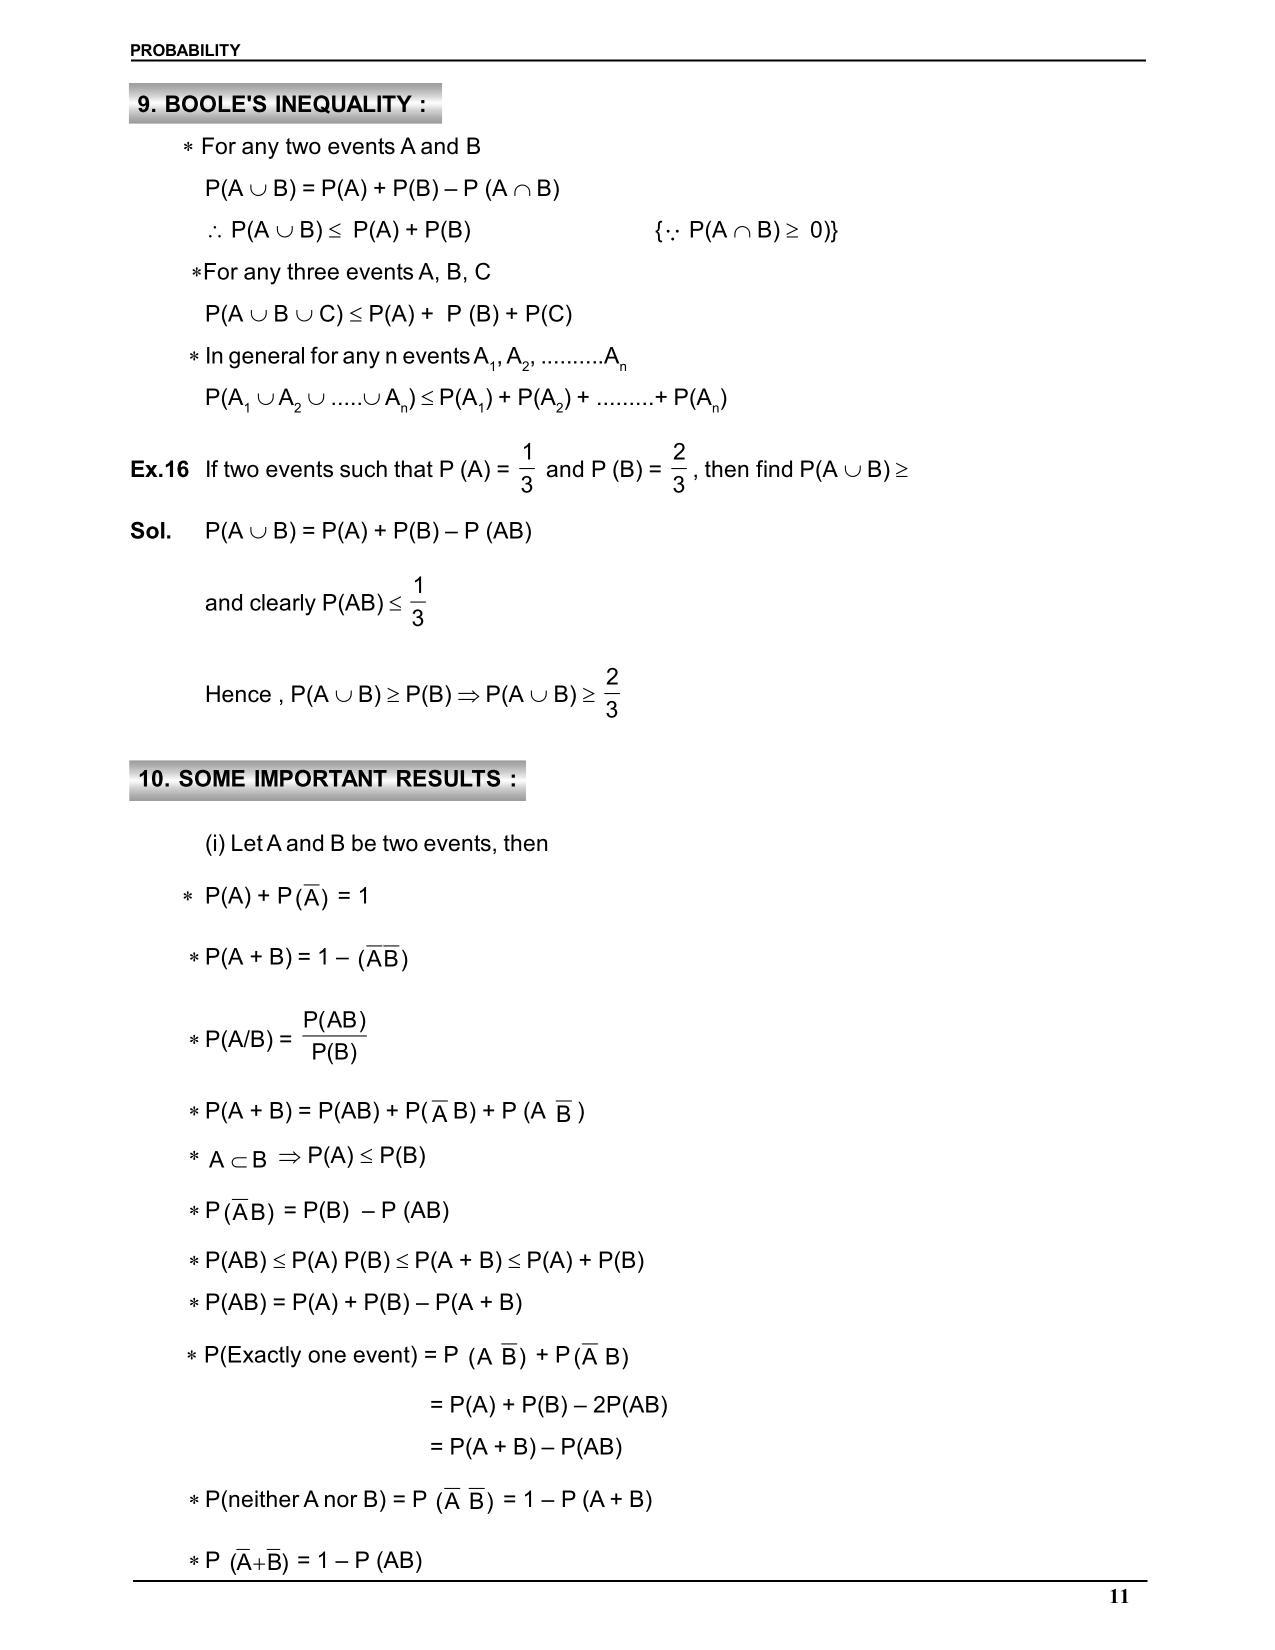 Probability Notes for Class 11 : Boole's Inequality